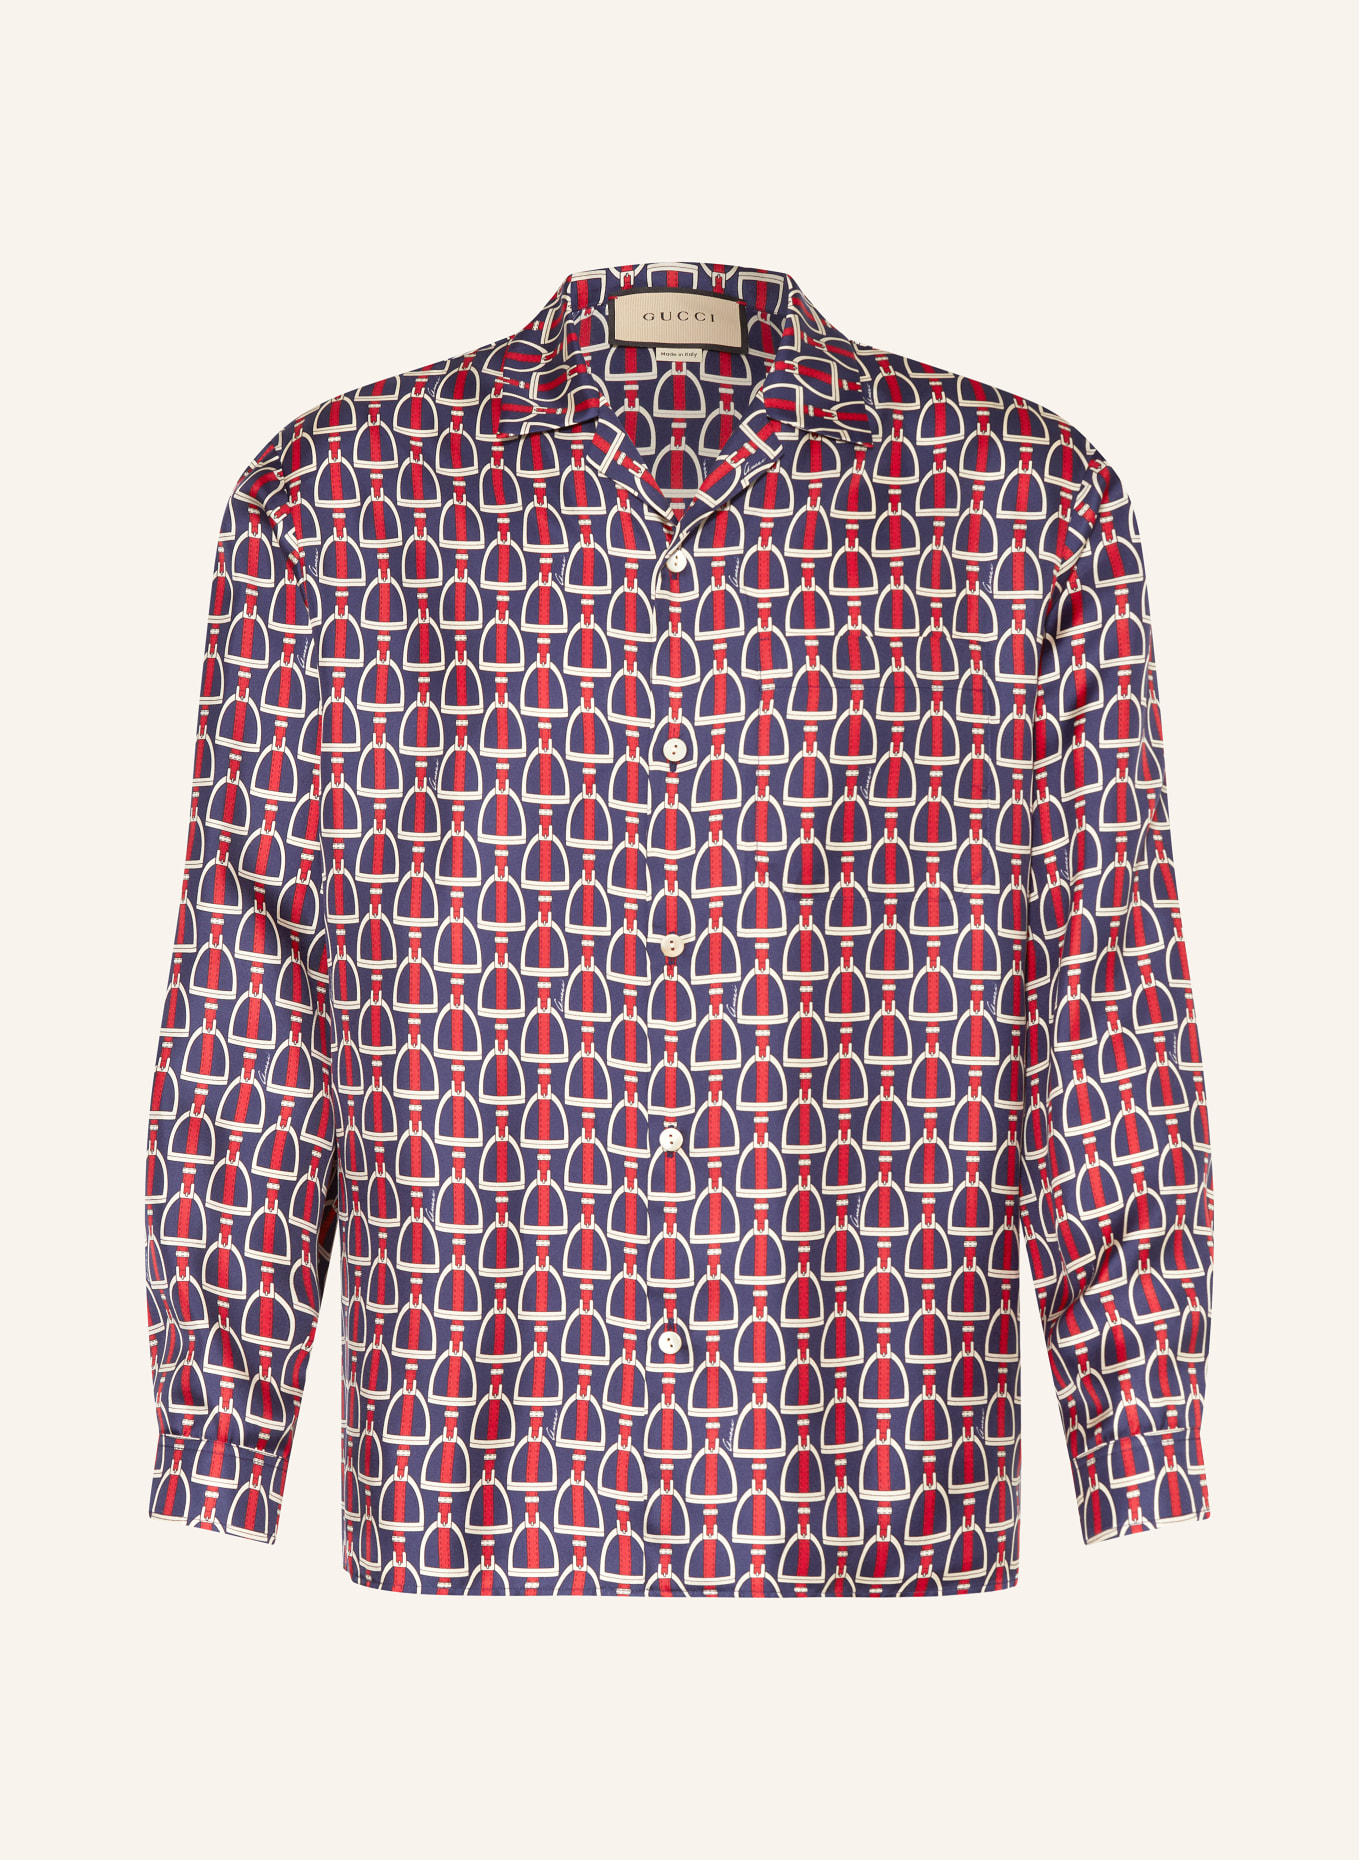 GUCCI Silk shirt comfort fit, Color: DARK BLUE/ RED/ CREAM (Image 1)